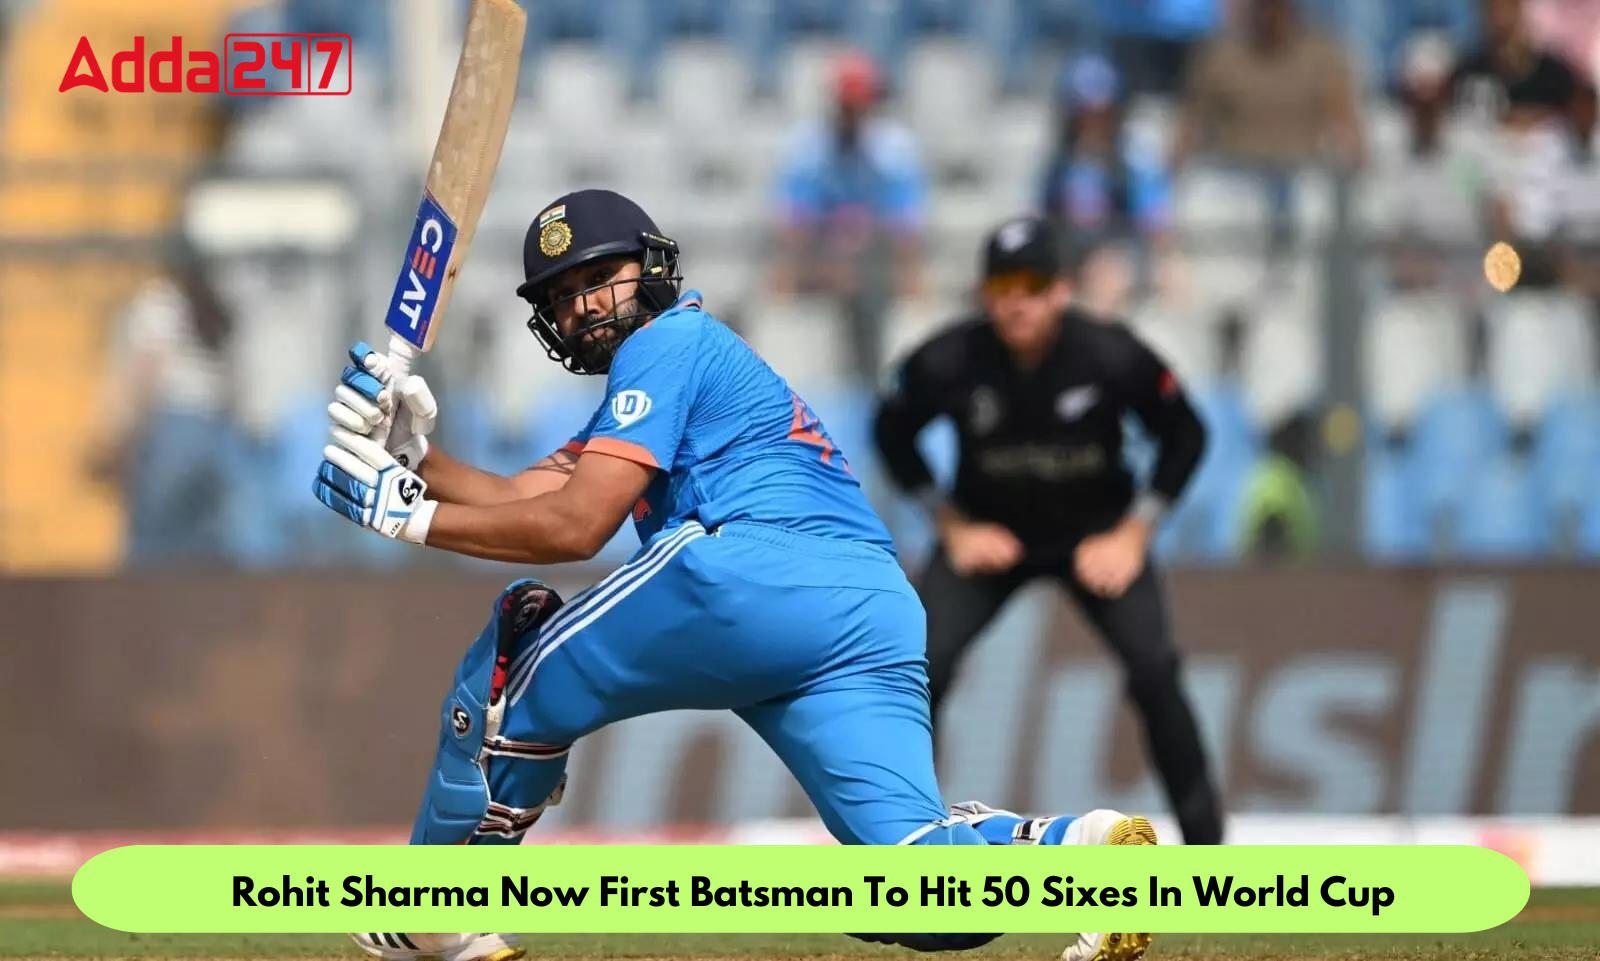 Rohit Sharma Now First Batsman To Hit 50 Sixes In World Cup